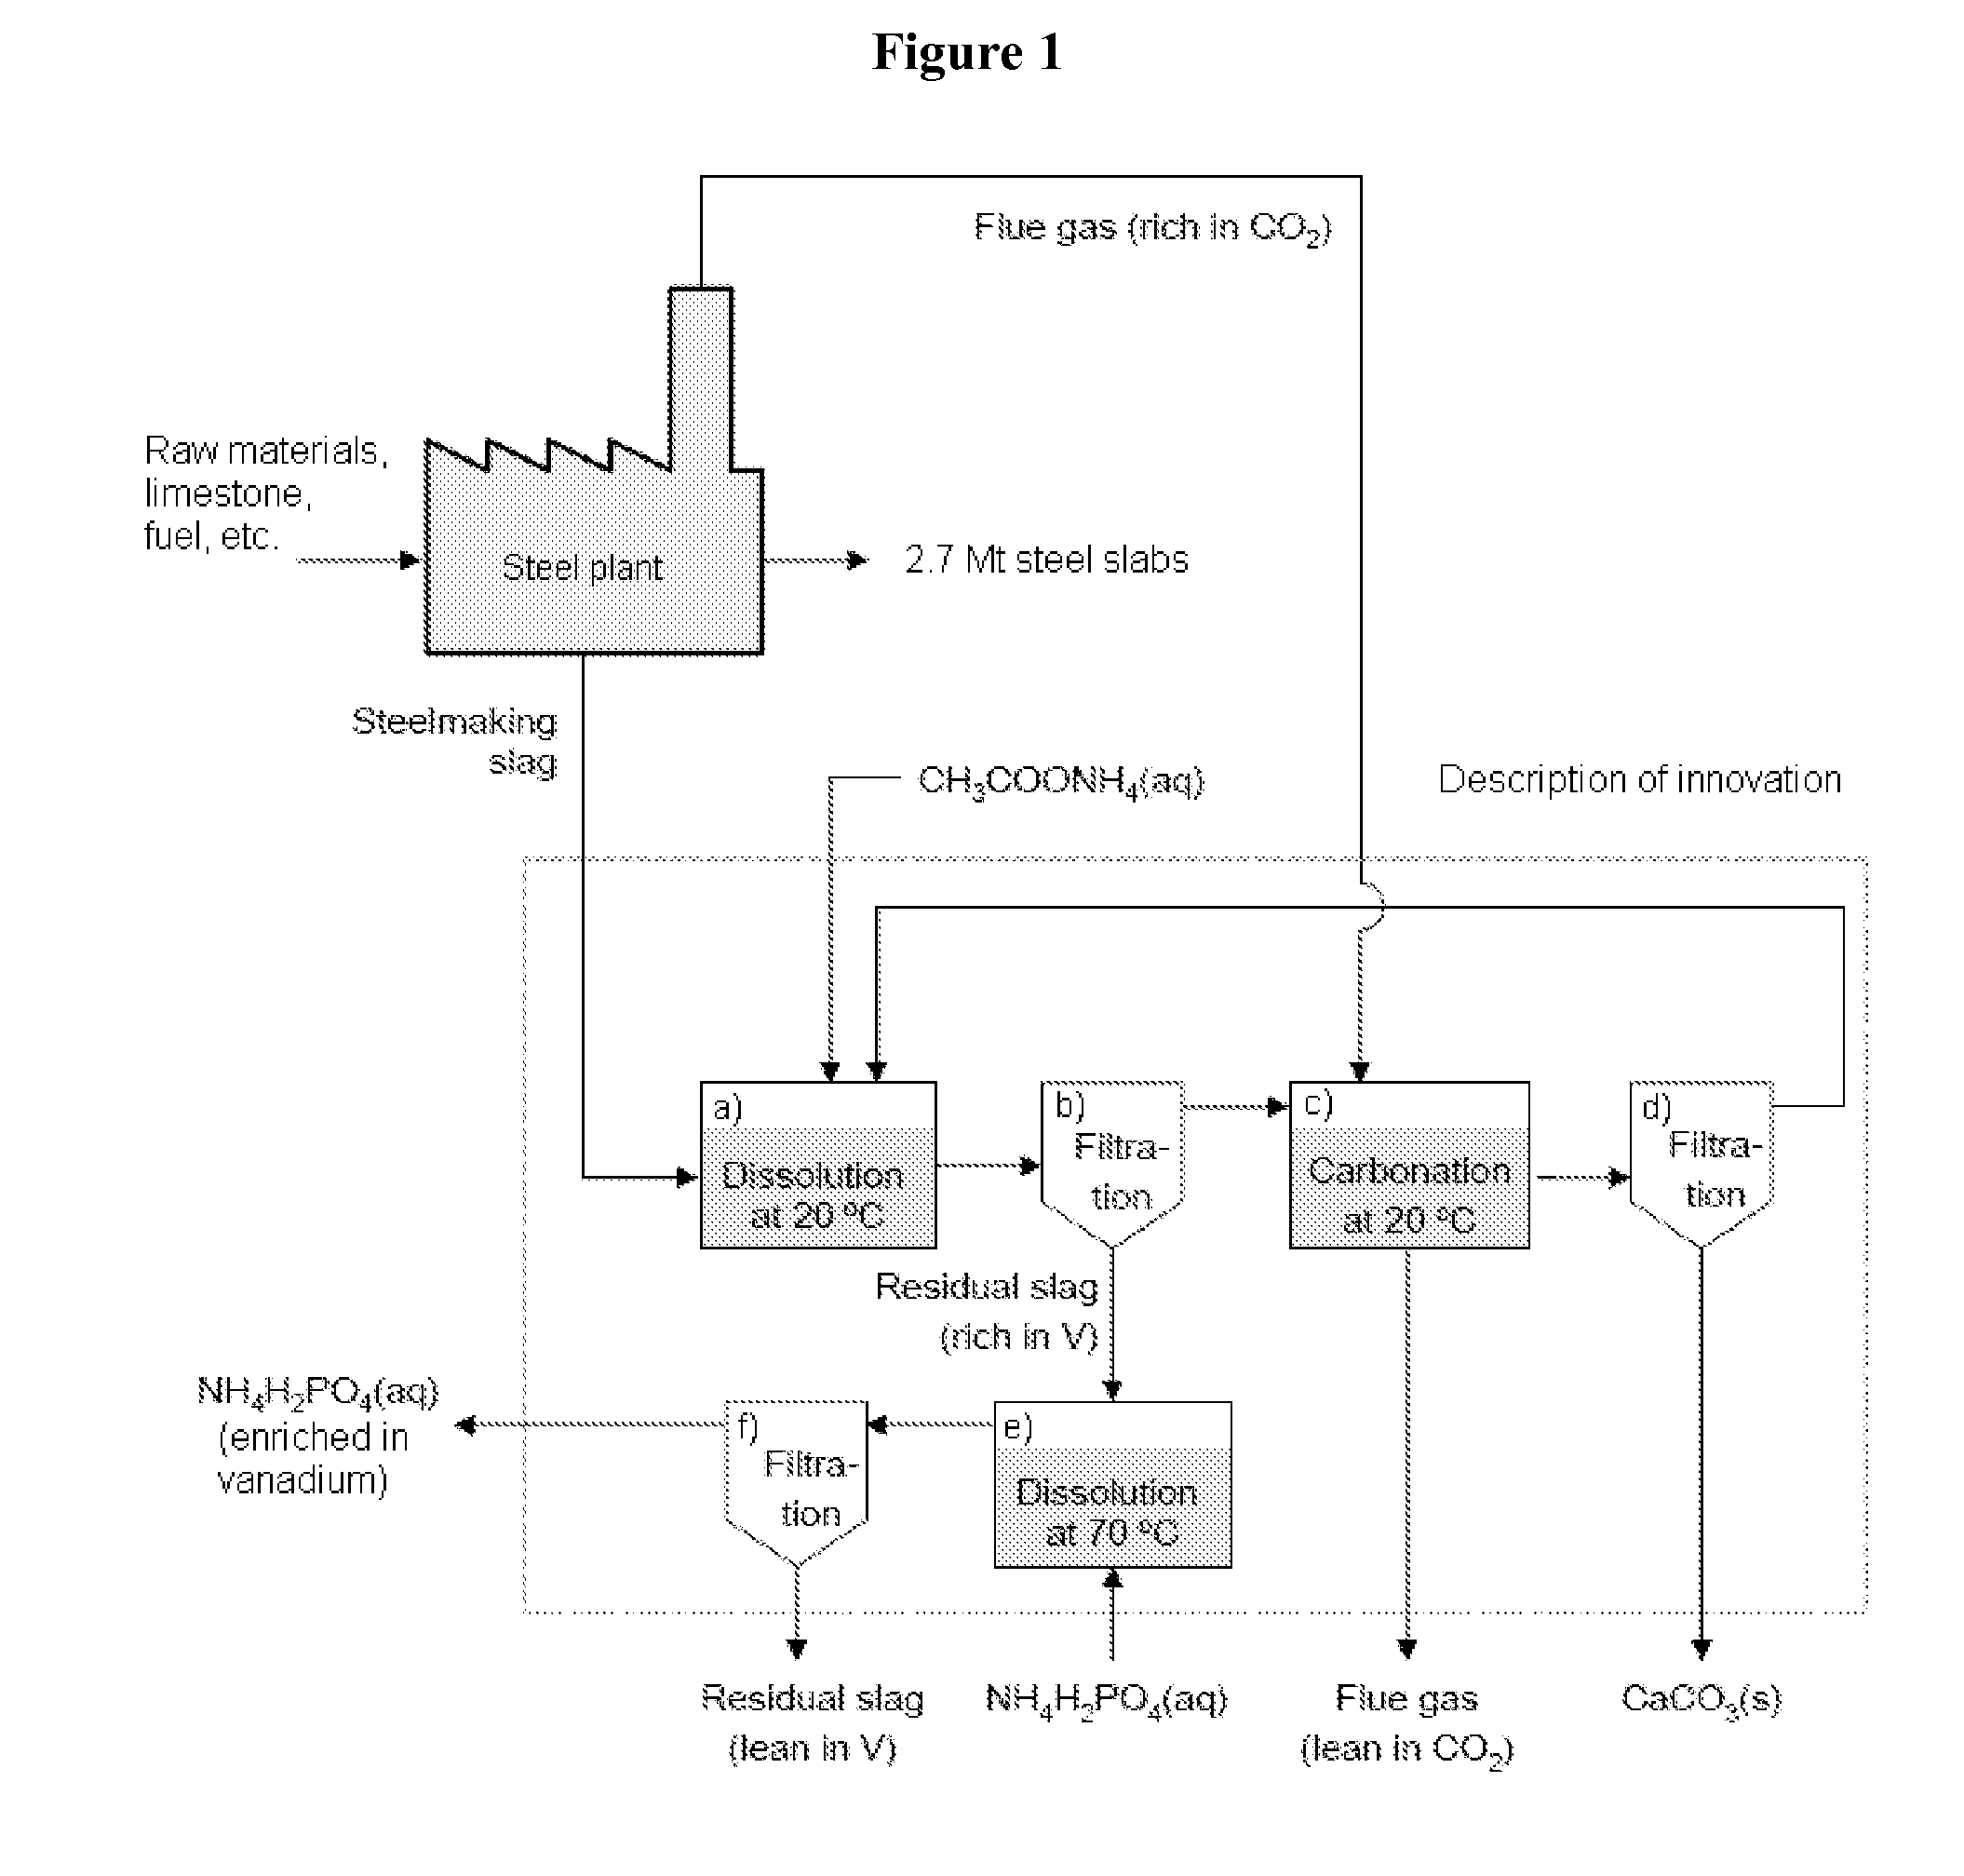 Method of producing calcium carbonate from waste and byproducts